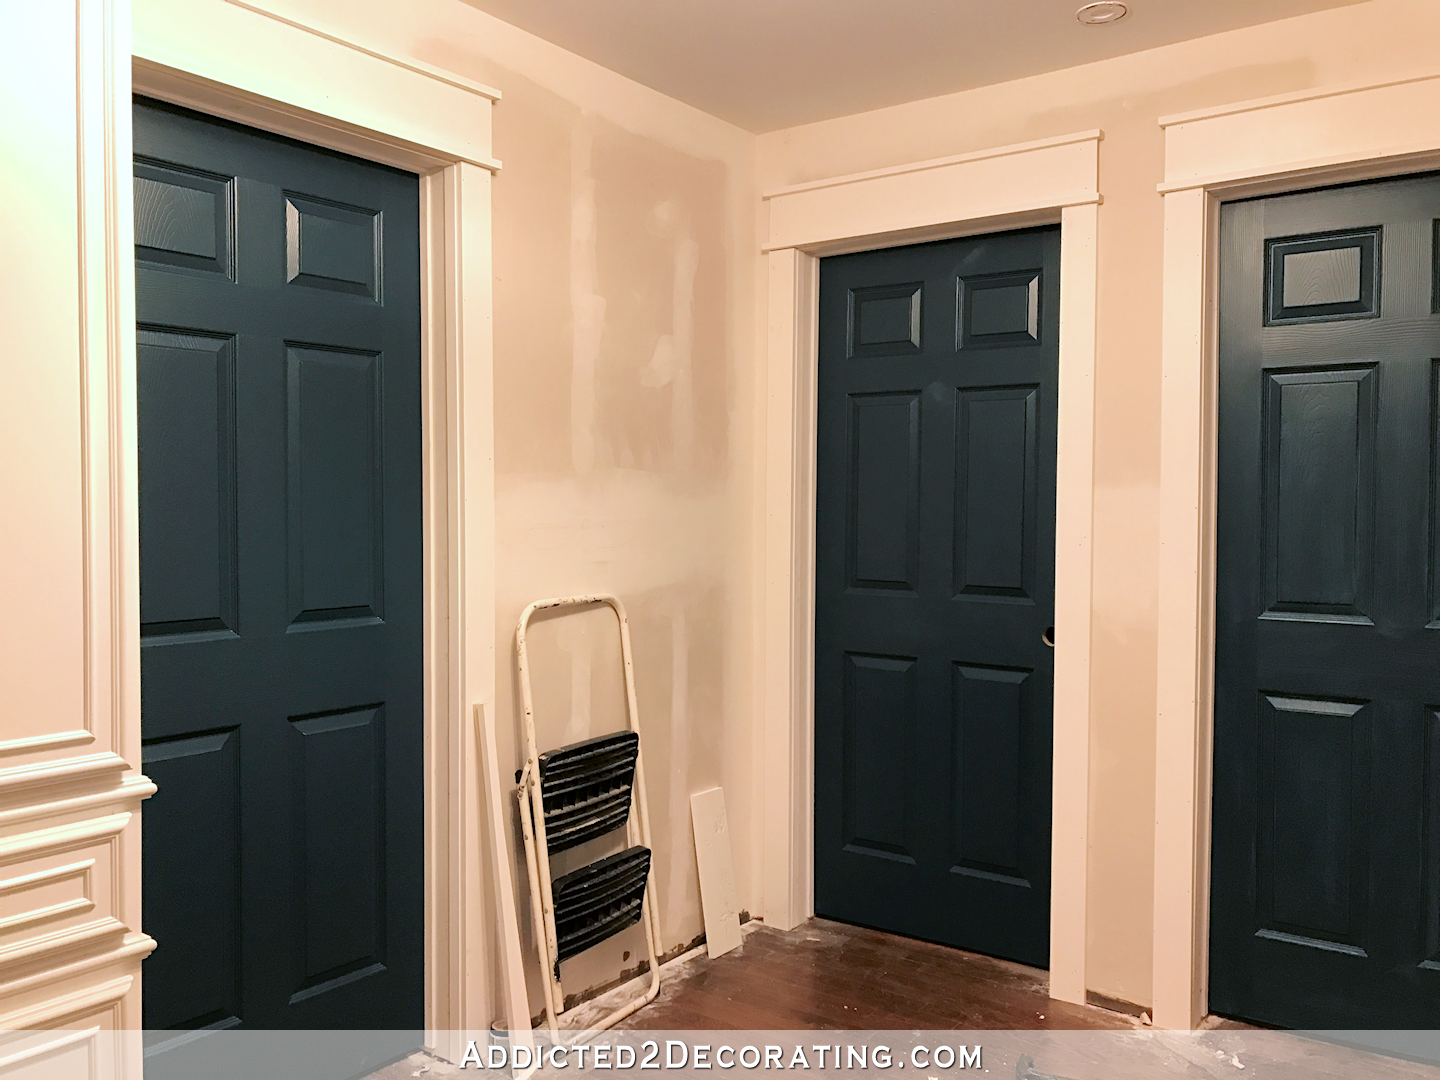 Closer To The Finish Line – Hallway Doors Trimmed Out